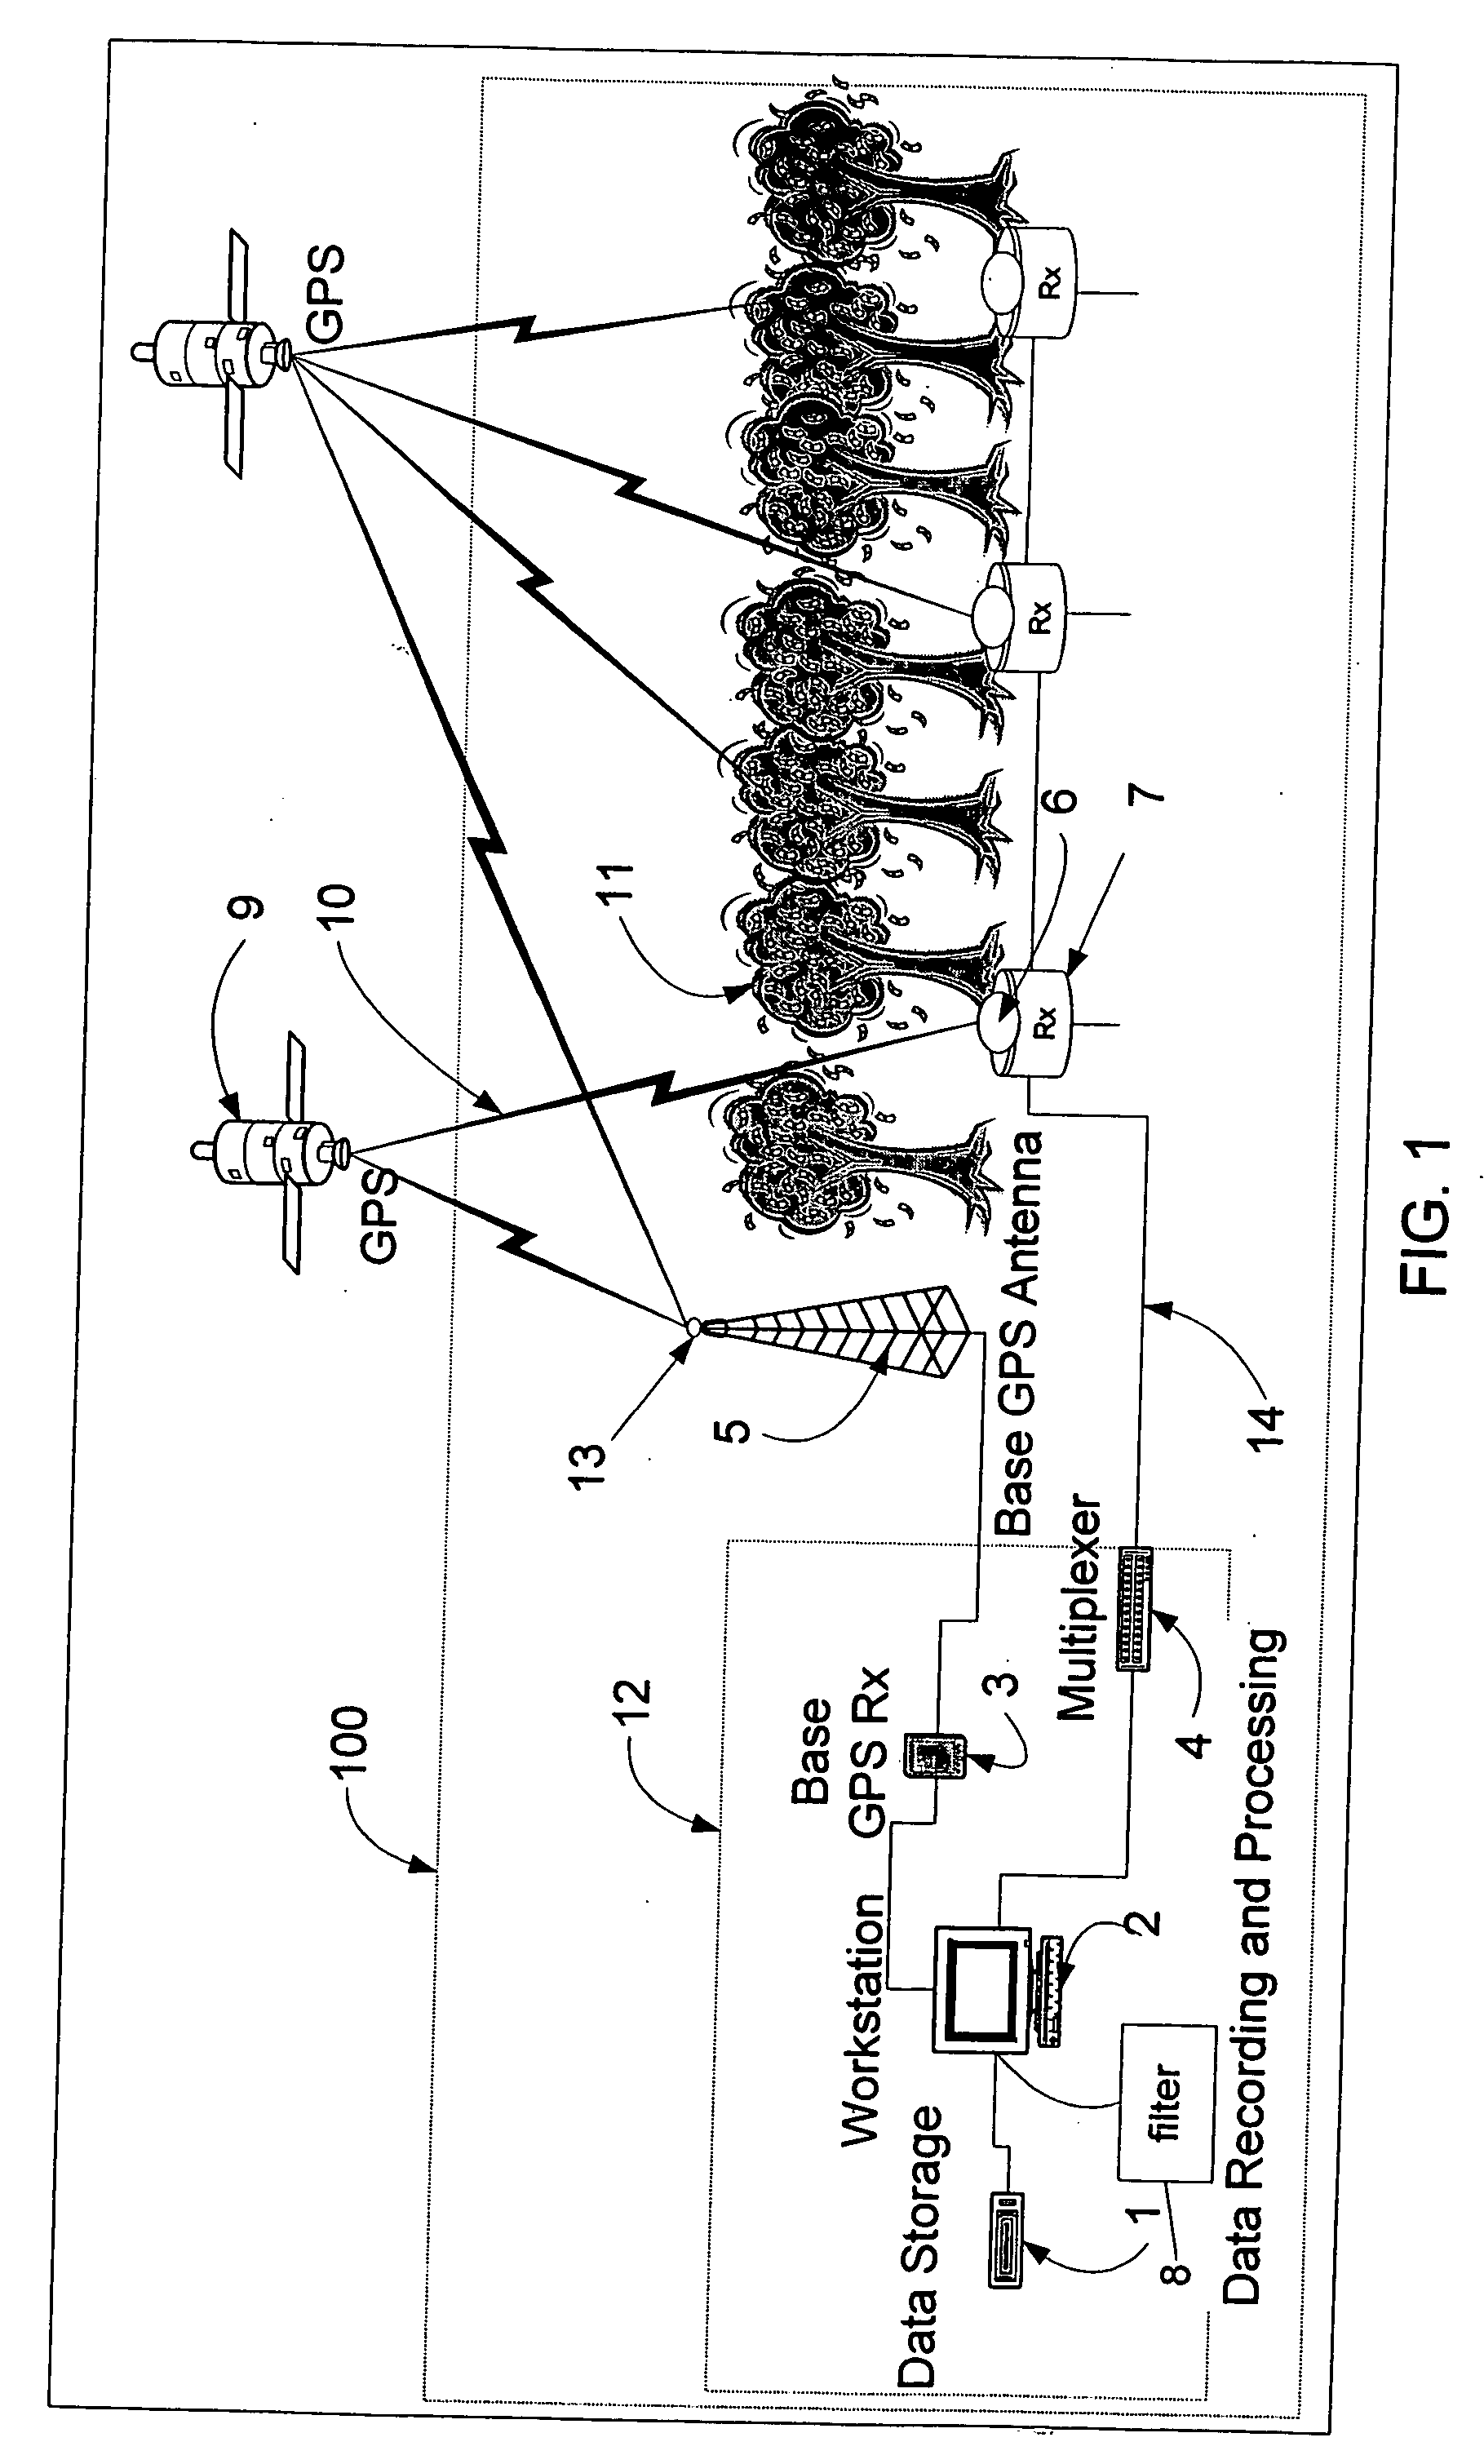 Method for positioning using GPS in a restrictive coverage environment